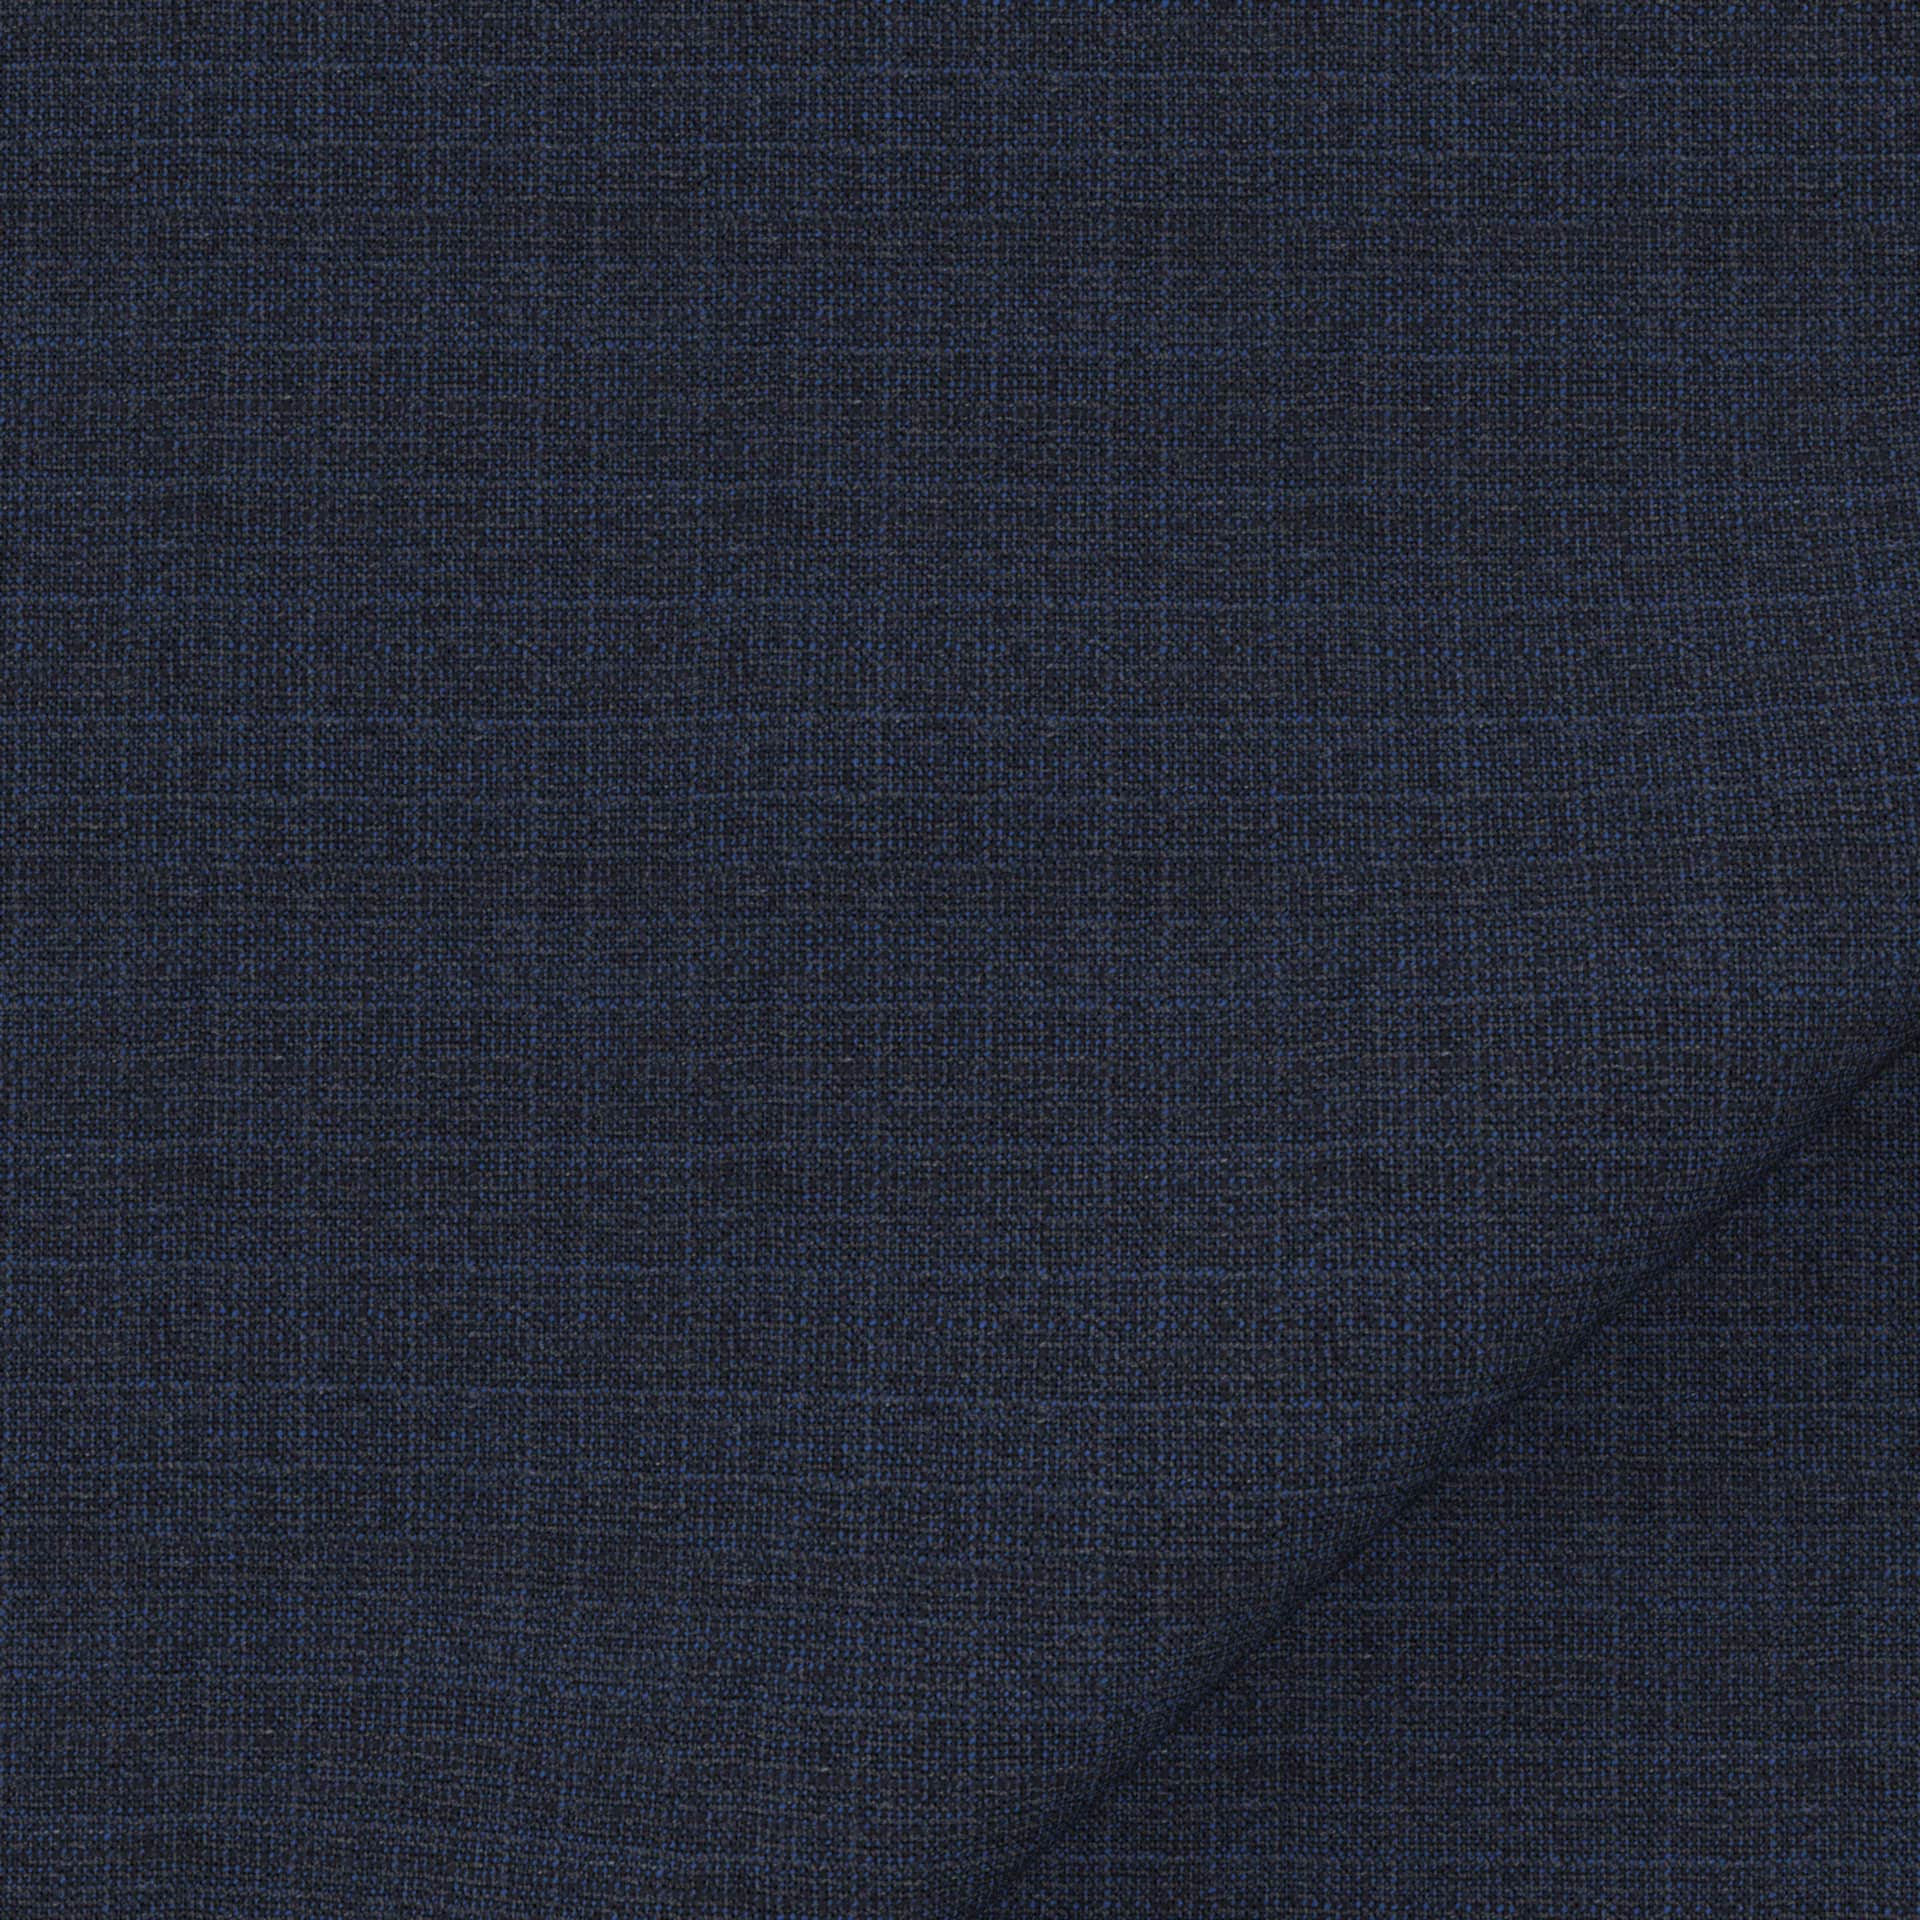 Custom-made-suit-plain-weave-square-blue-Italian-fabric-onceaday